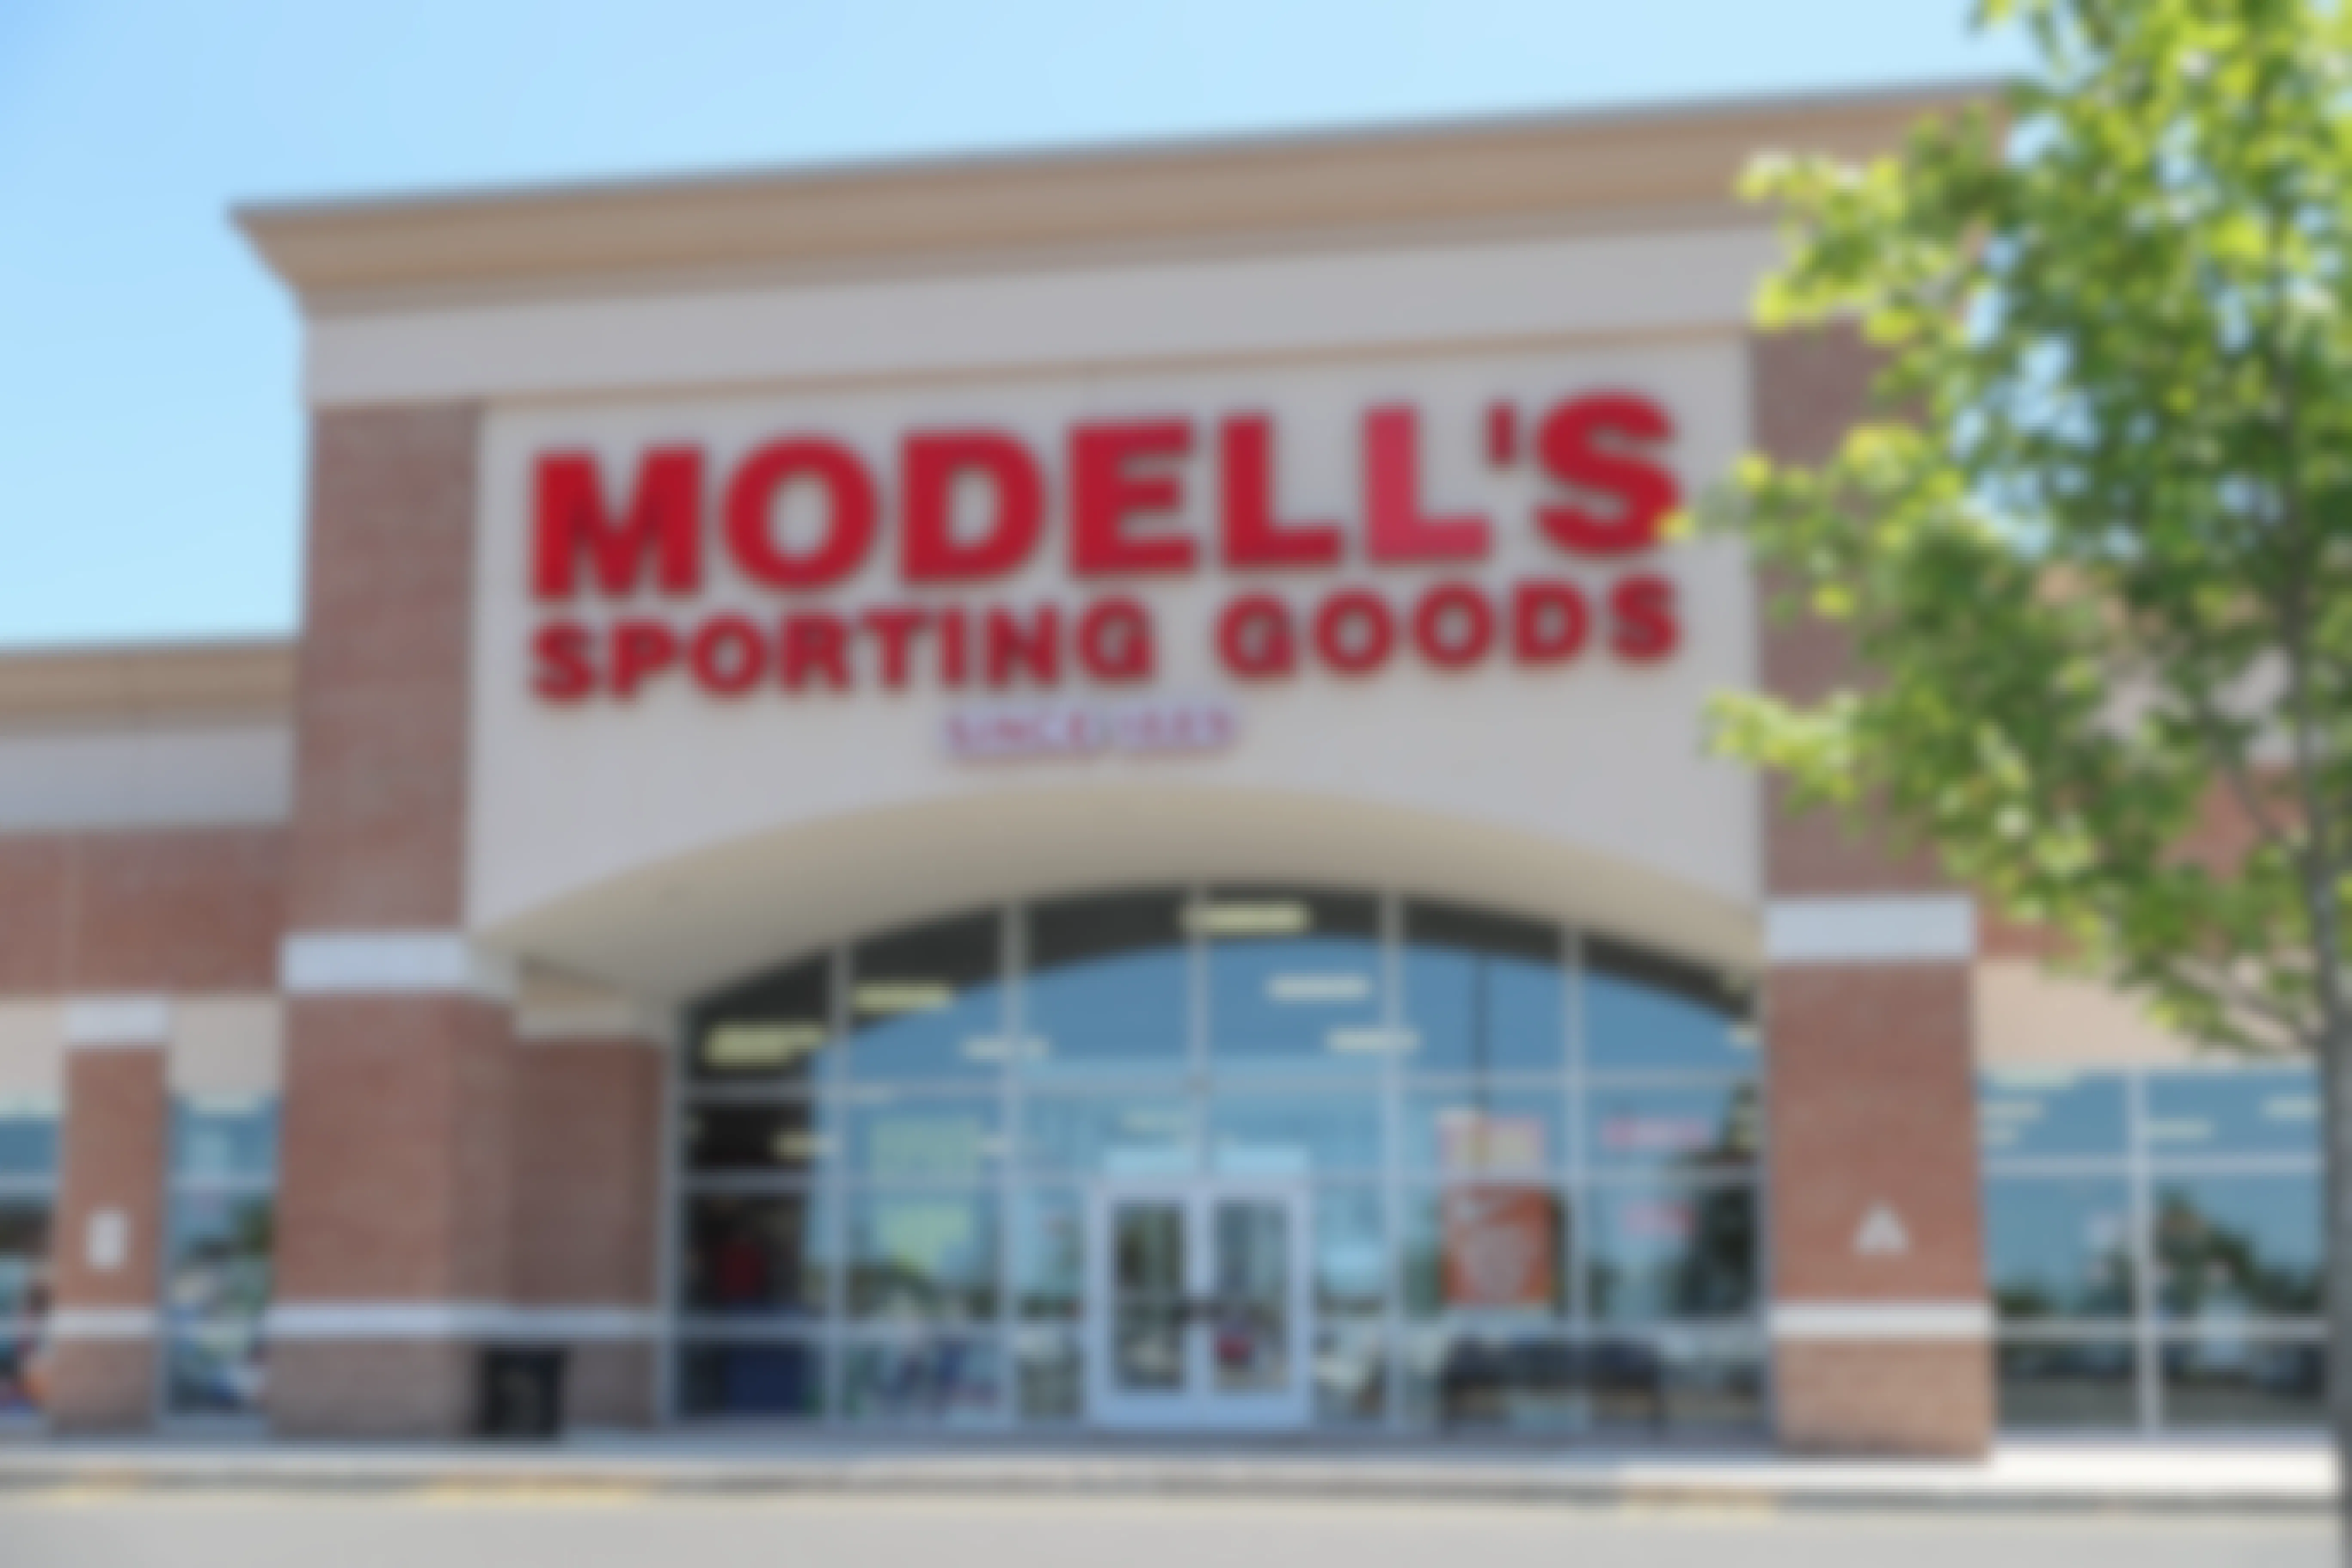 Modell's Sporting Goods retail store location, store front.